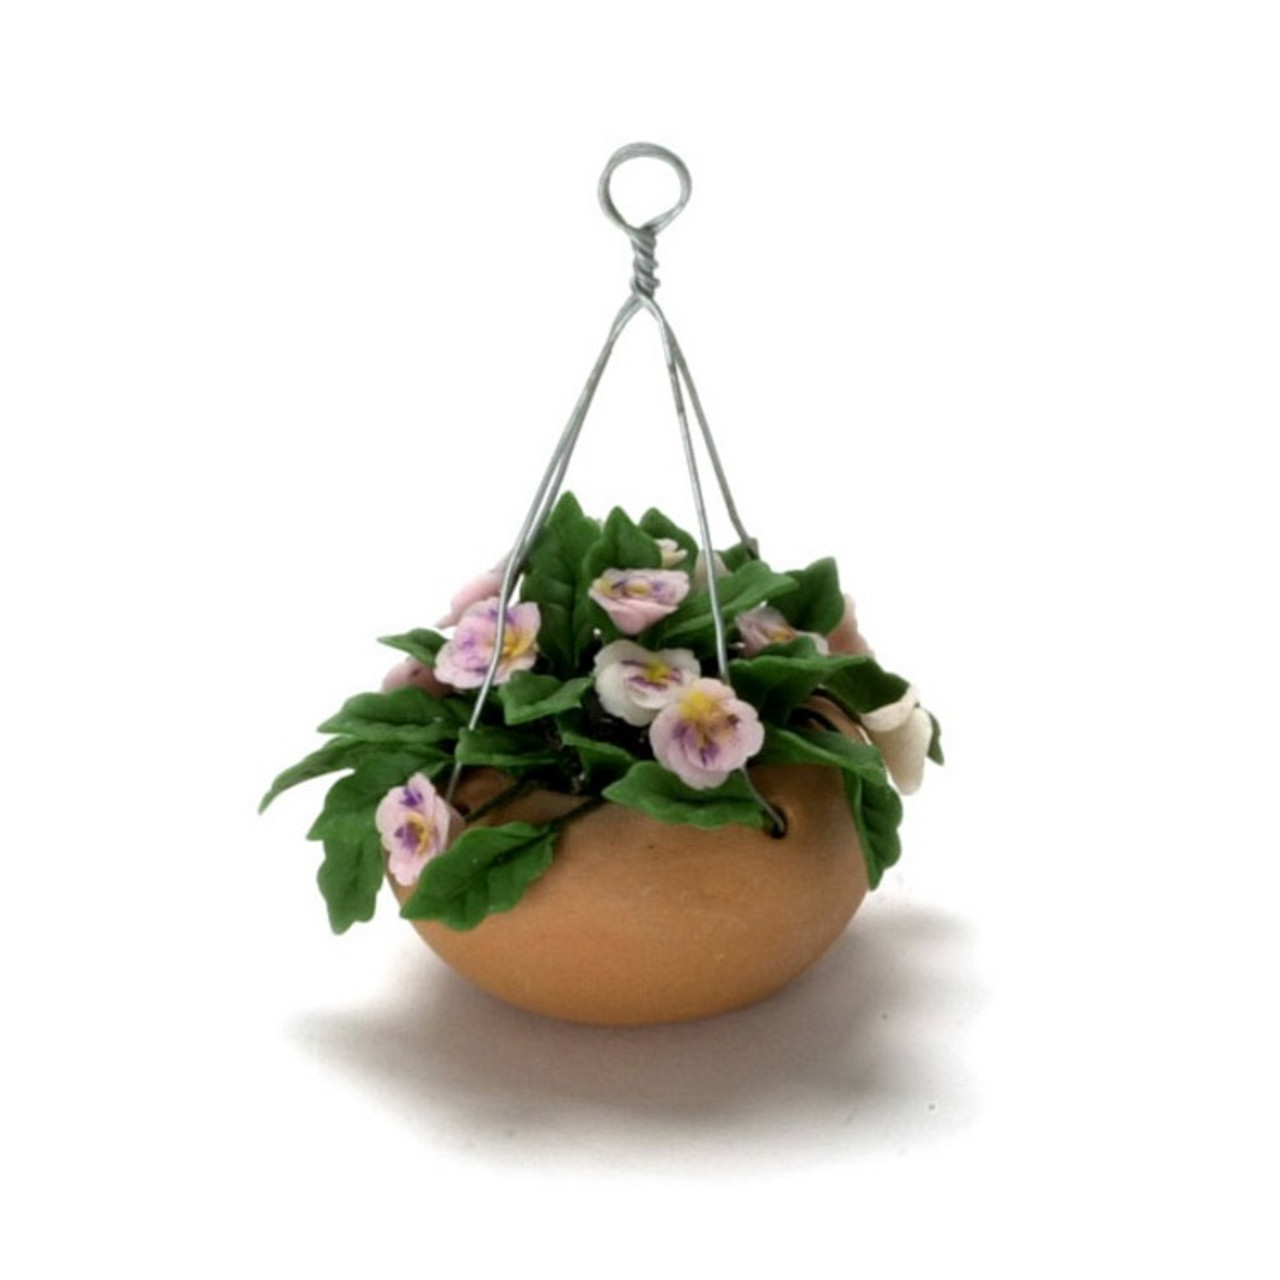 Hanging planter with pink pansies and greenery